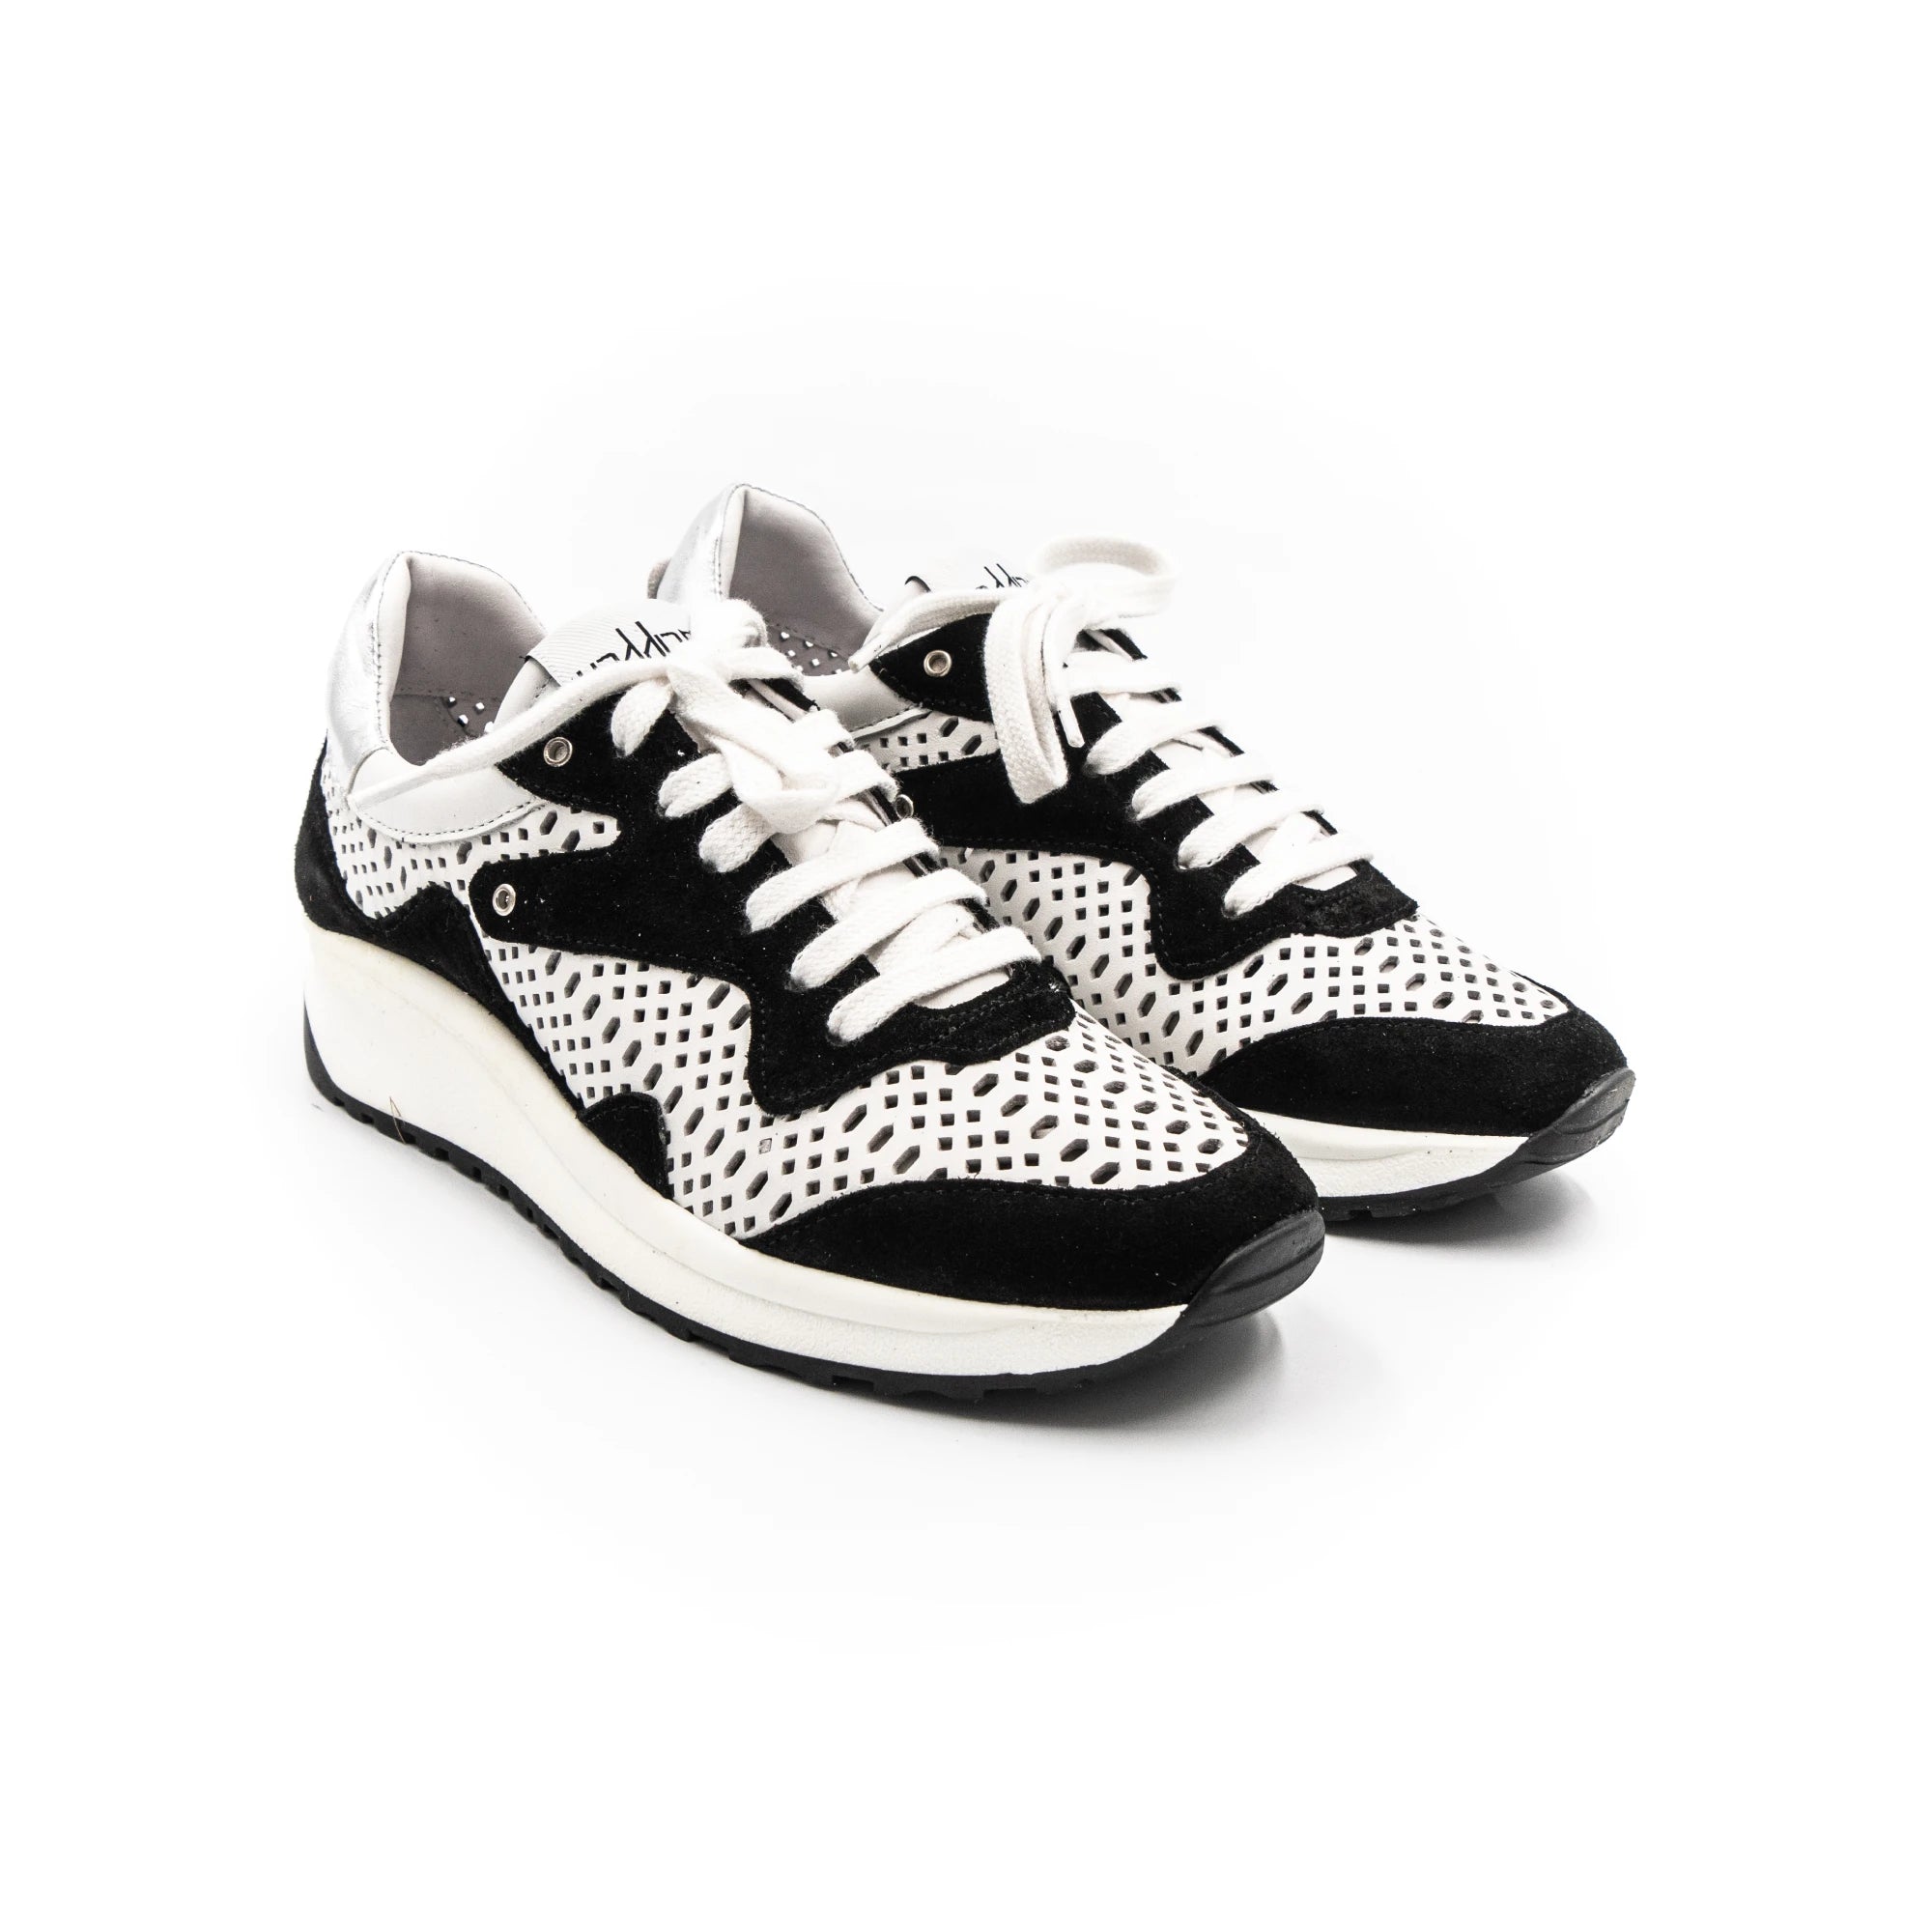 Black and white perforated sneakers.